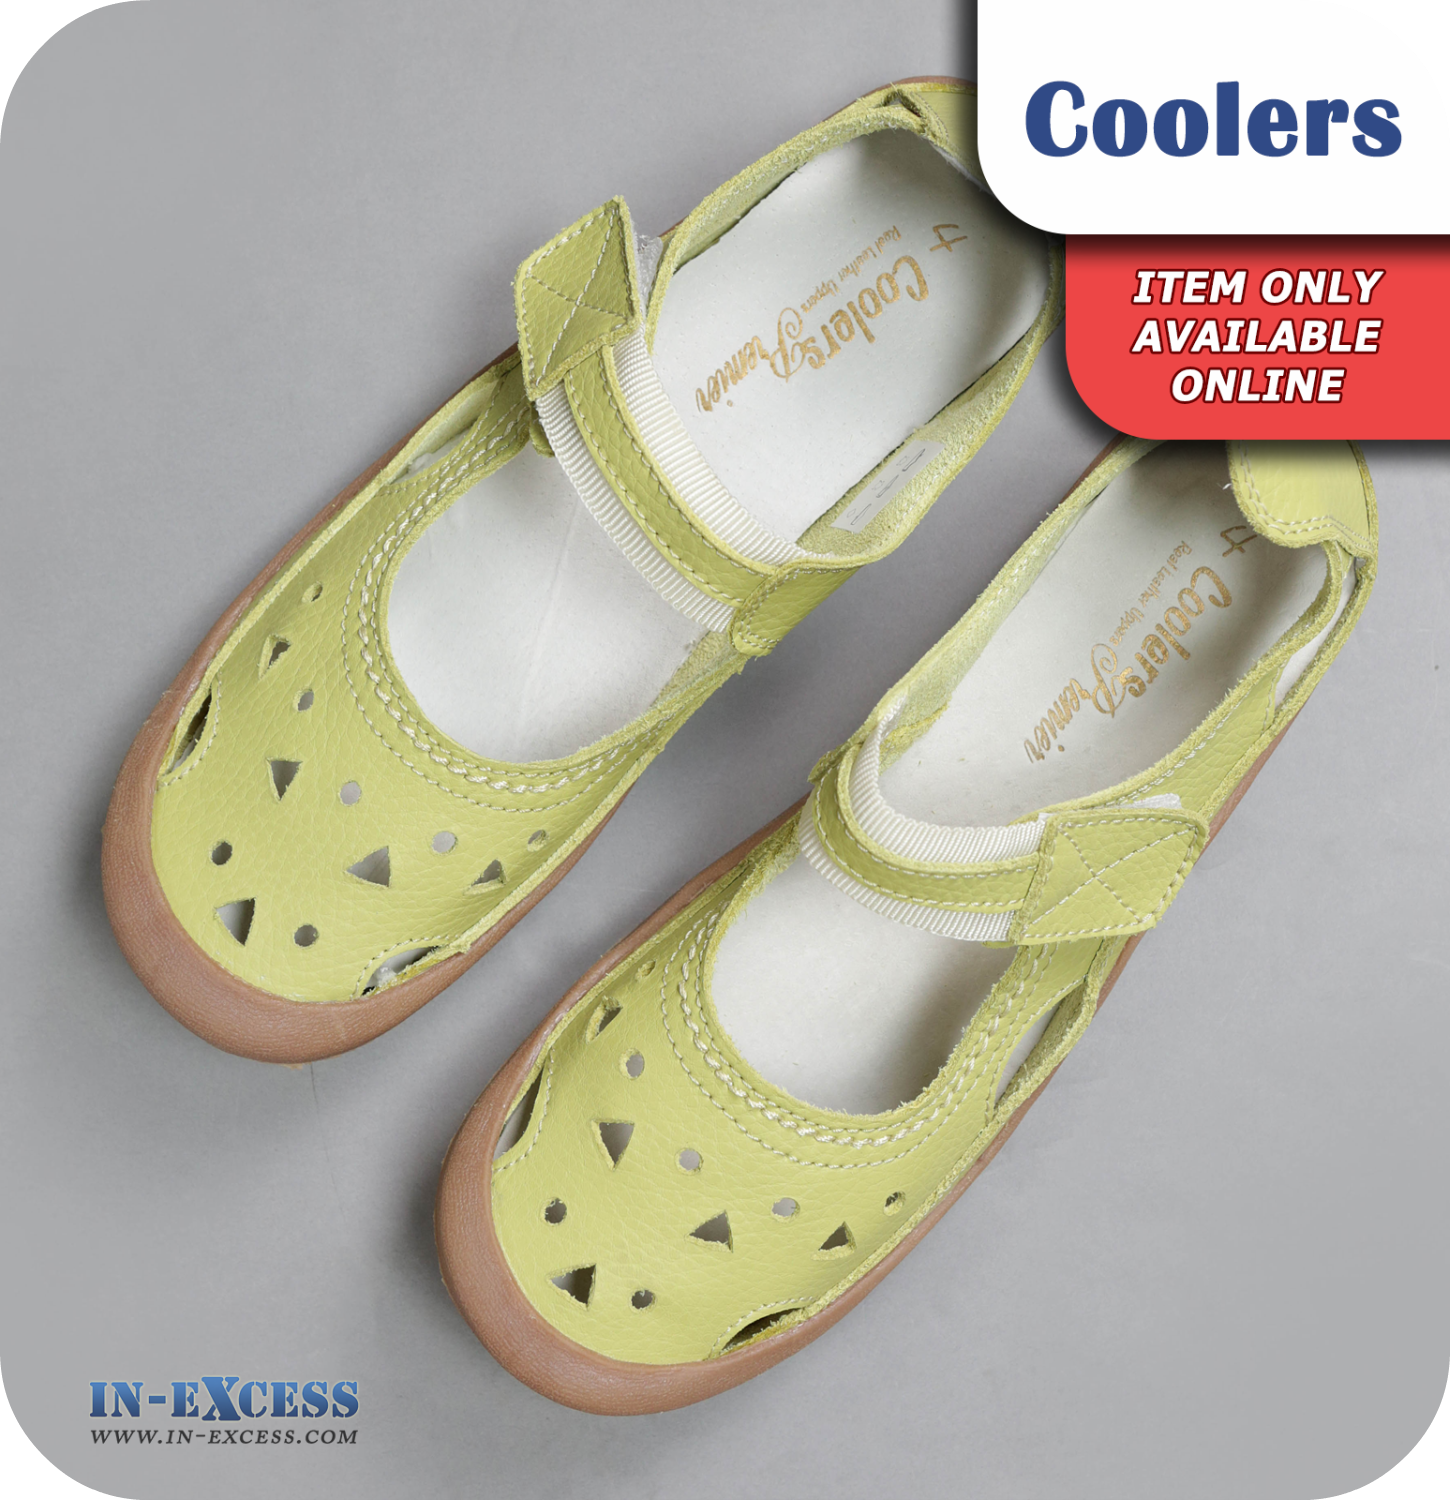 Coolers Premier Leather Sandals - Green